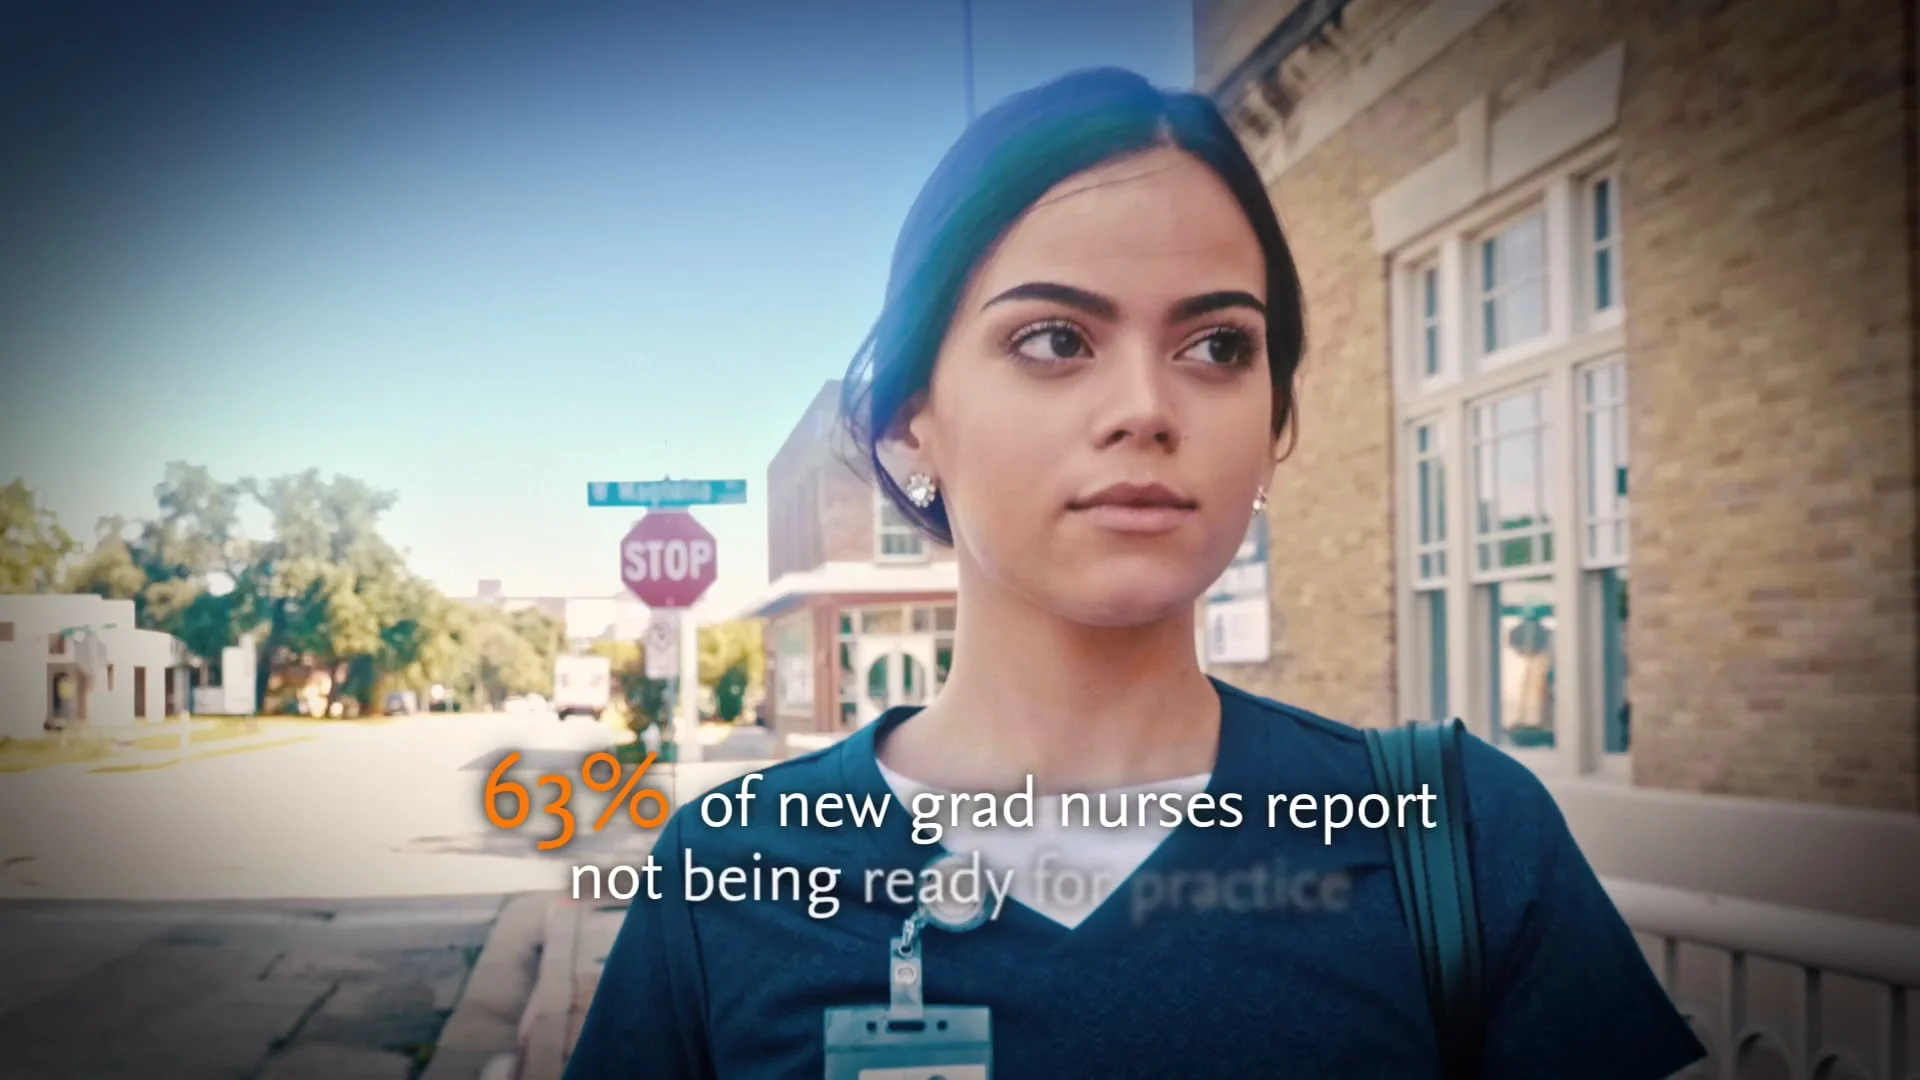 Young female nurse walking down the street. Statistic over the image says "63% of new grad nurses report not being ready for practice."